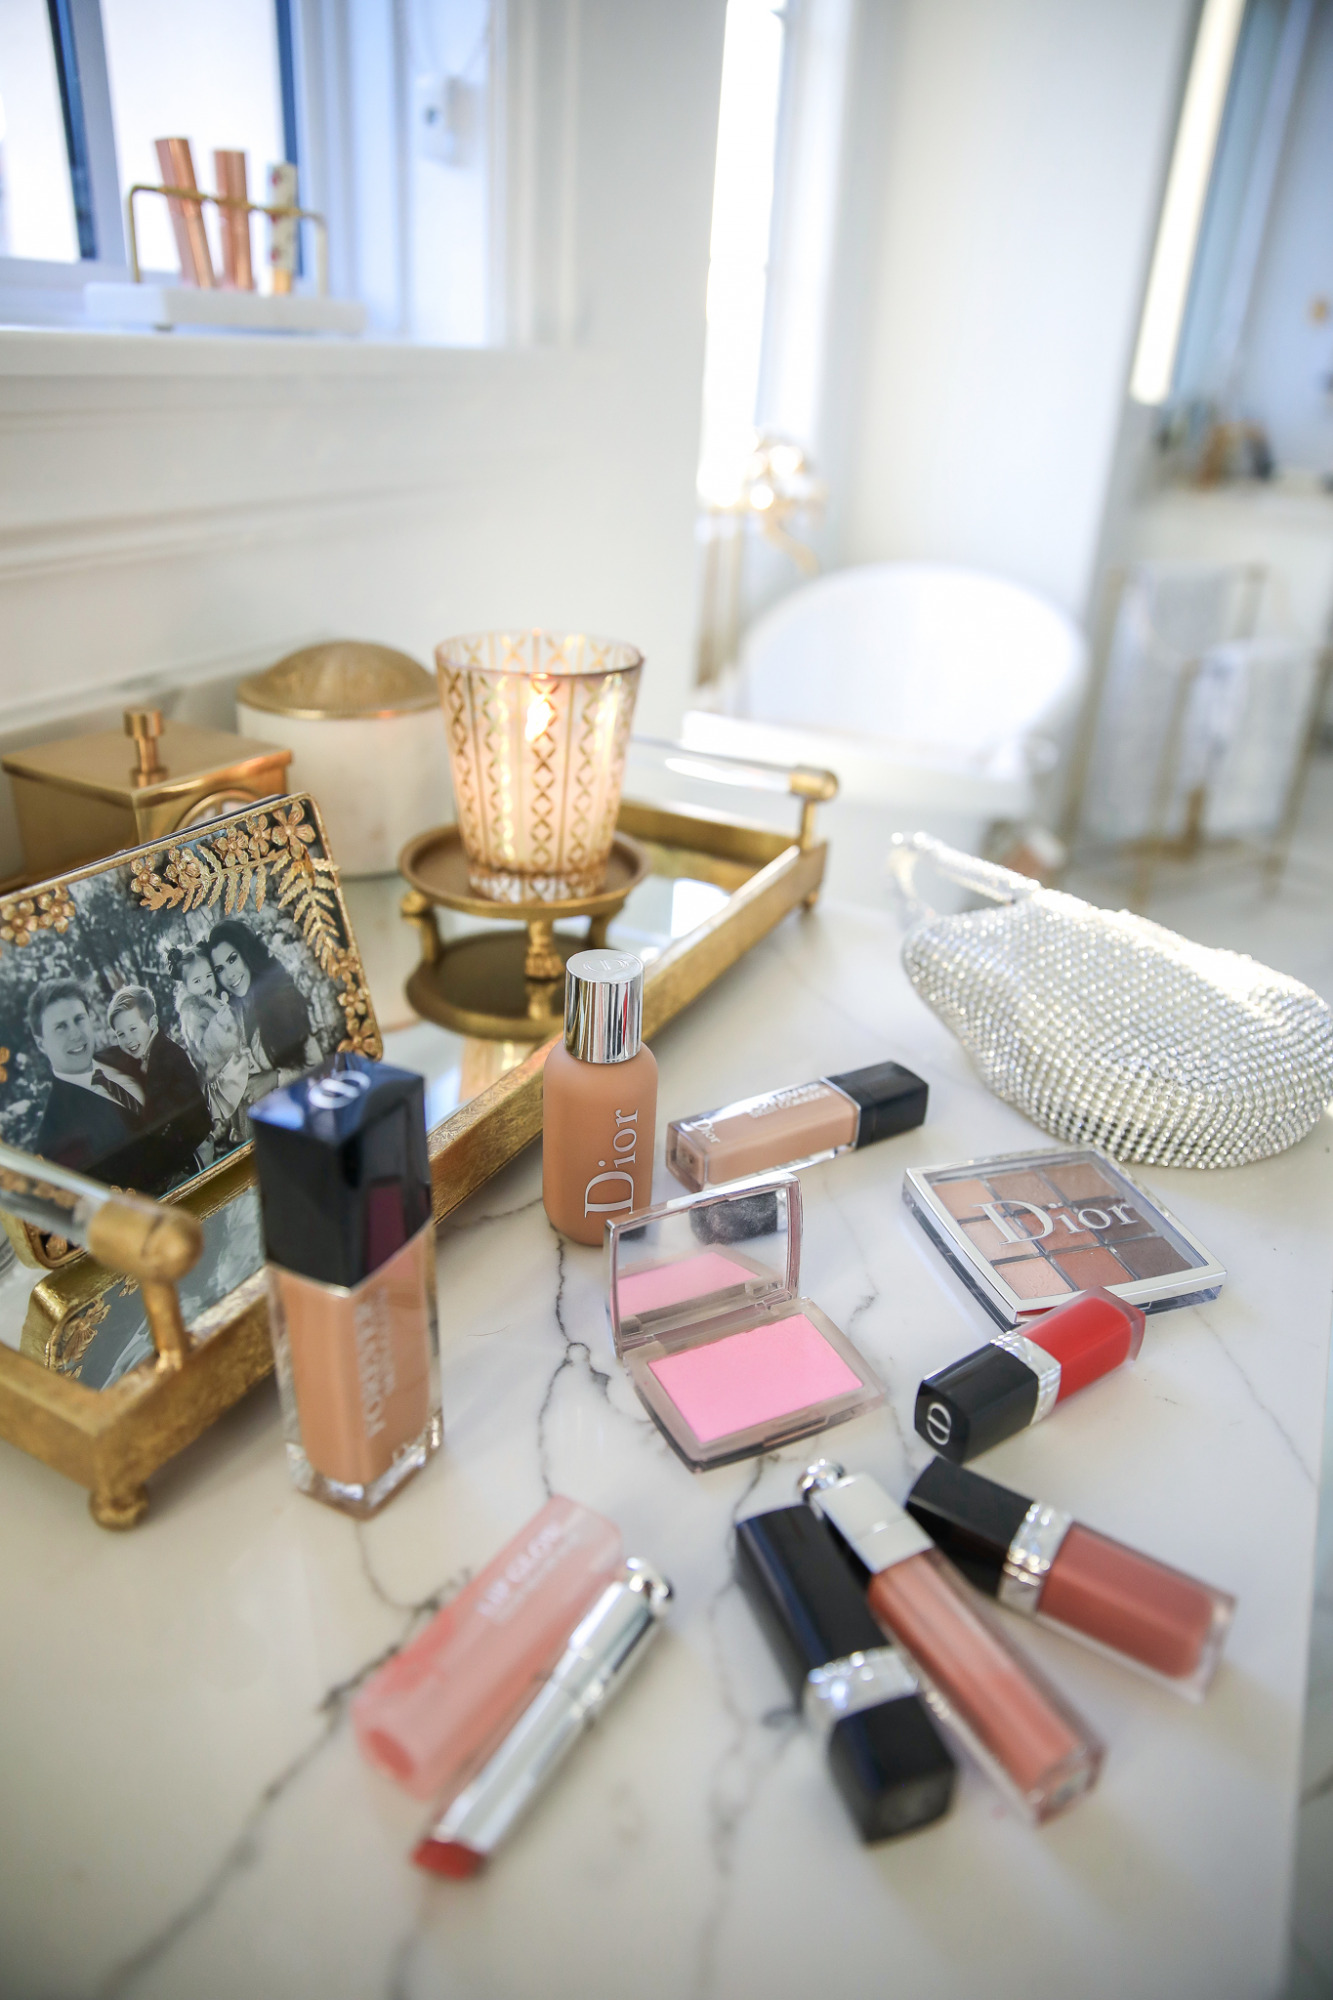 Dior Makeup Favorites featured by top US beauty blogger, Emily Gemma of The Sweetest Thing